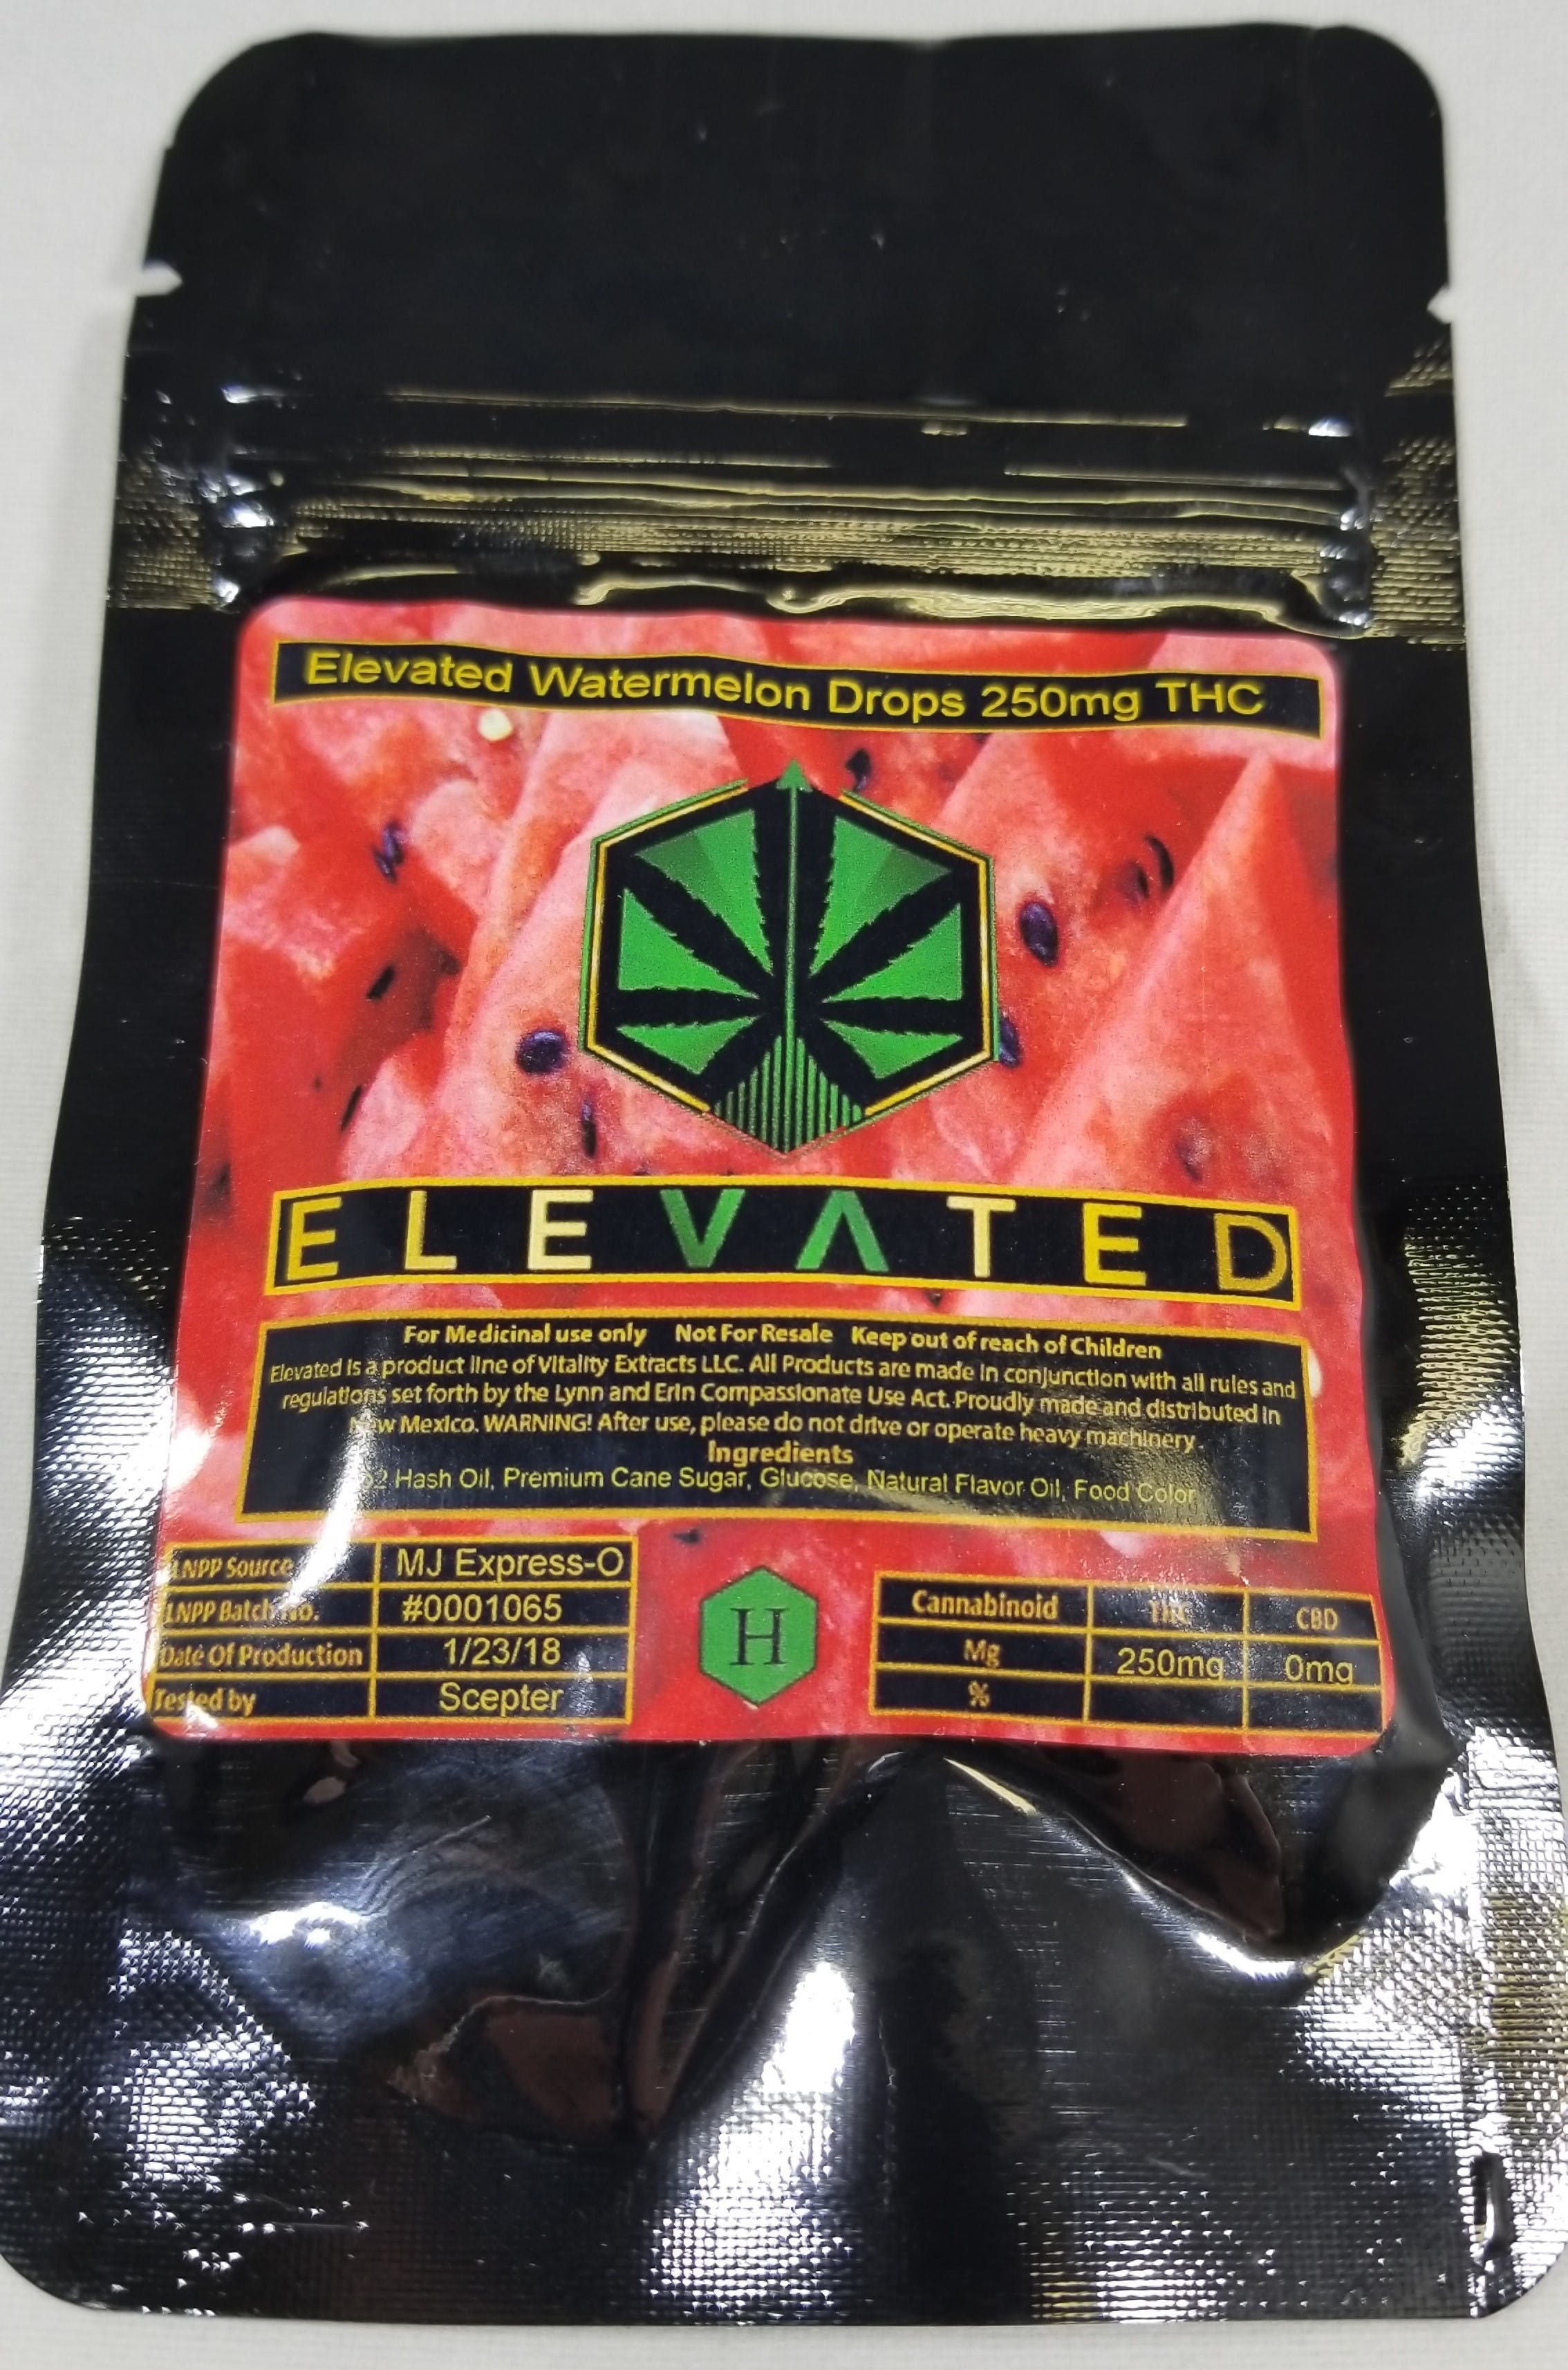 edible-elevated-watermelon-drops-250mg-thc